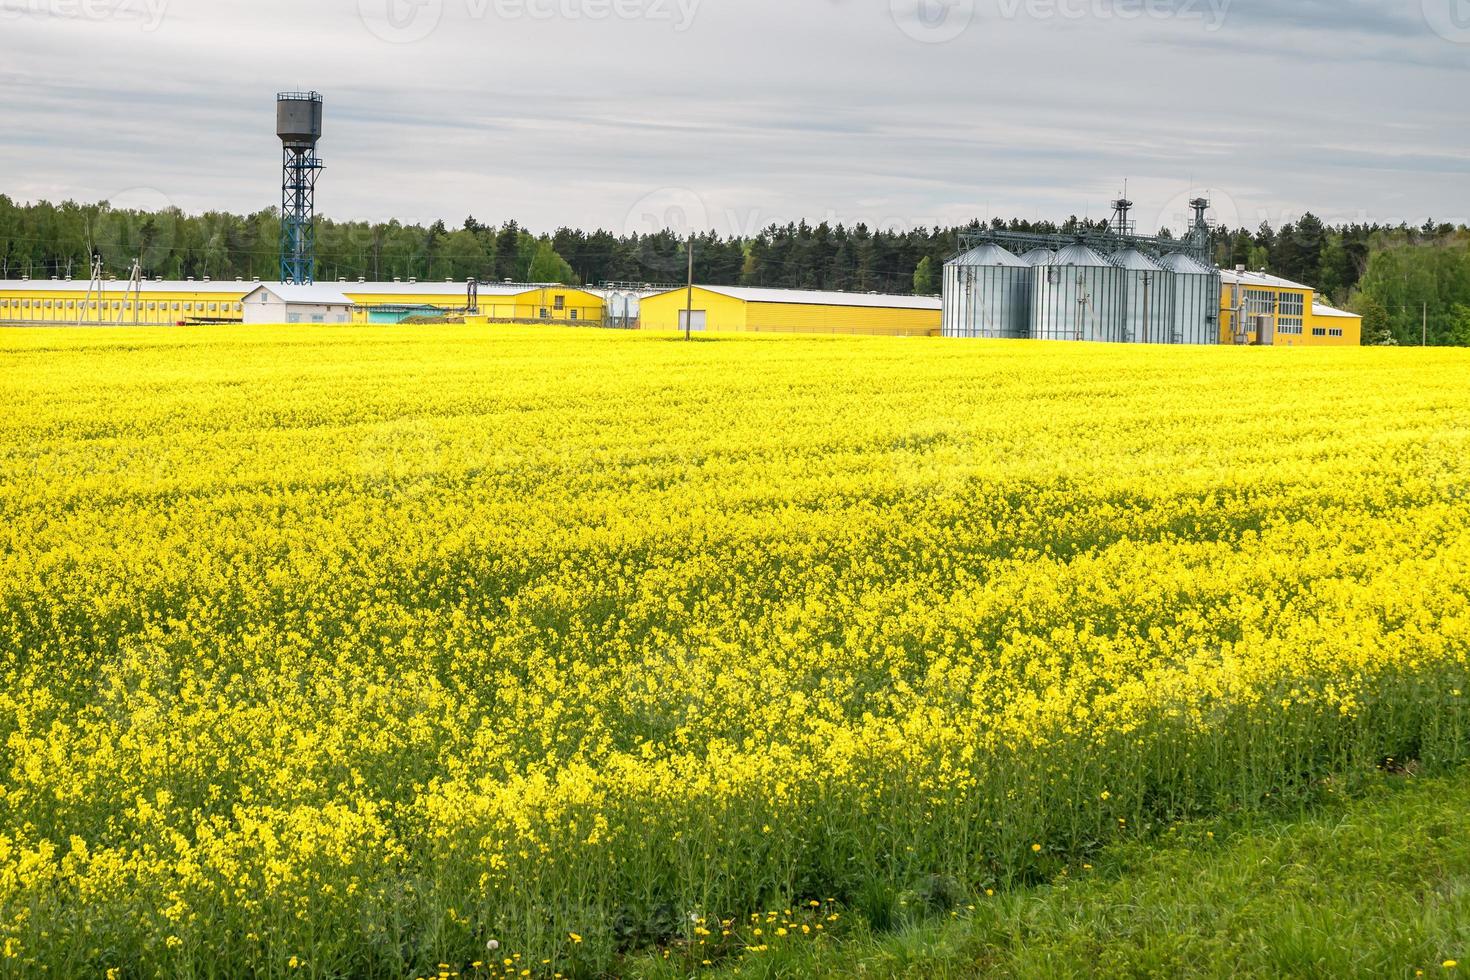 Field of flower of rapeseed, canola colza in Brassica napus on agro-processing plant for processing and silver silos for drying cleaning and storage of agricultural products, flour, cereals and grain photo